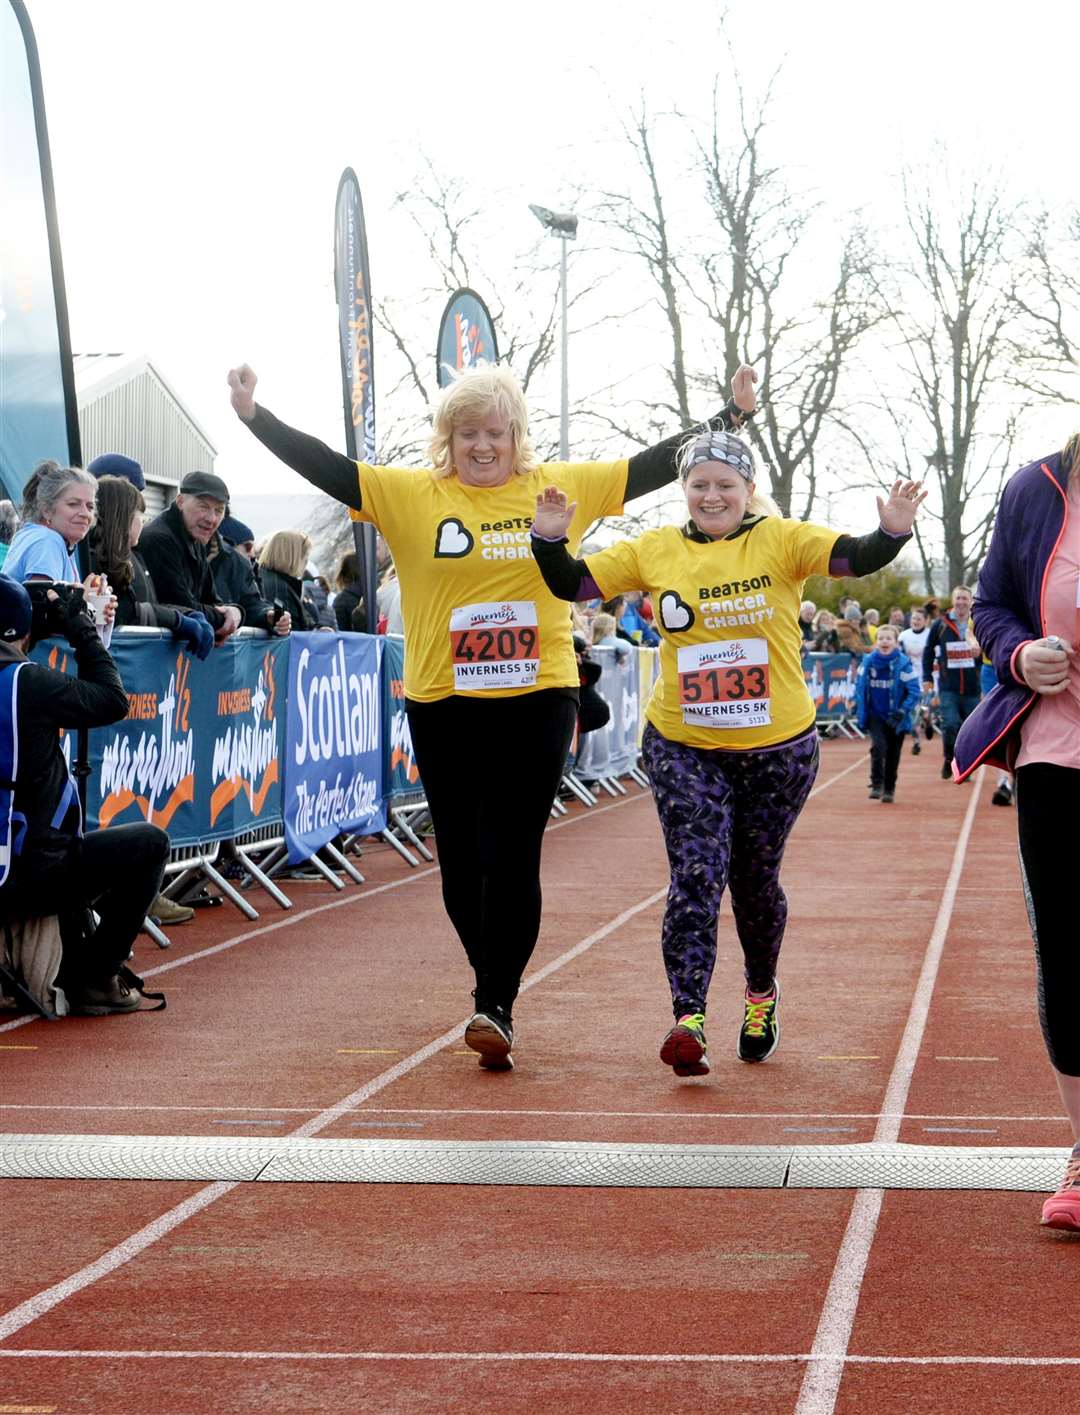 Joy for two Beatson Cancer Charity finishers.